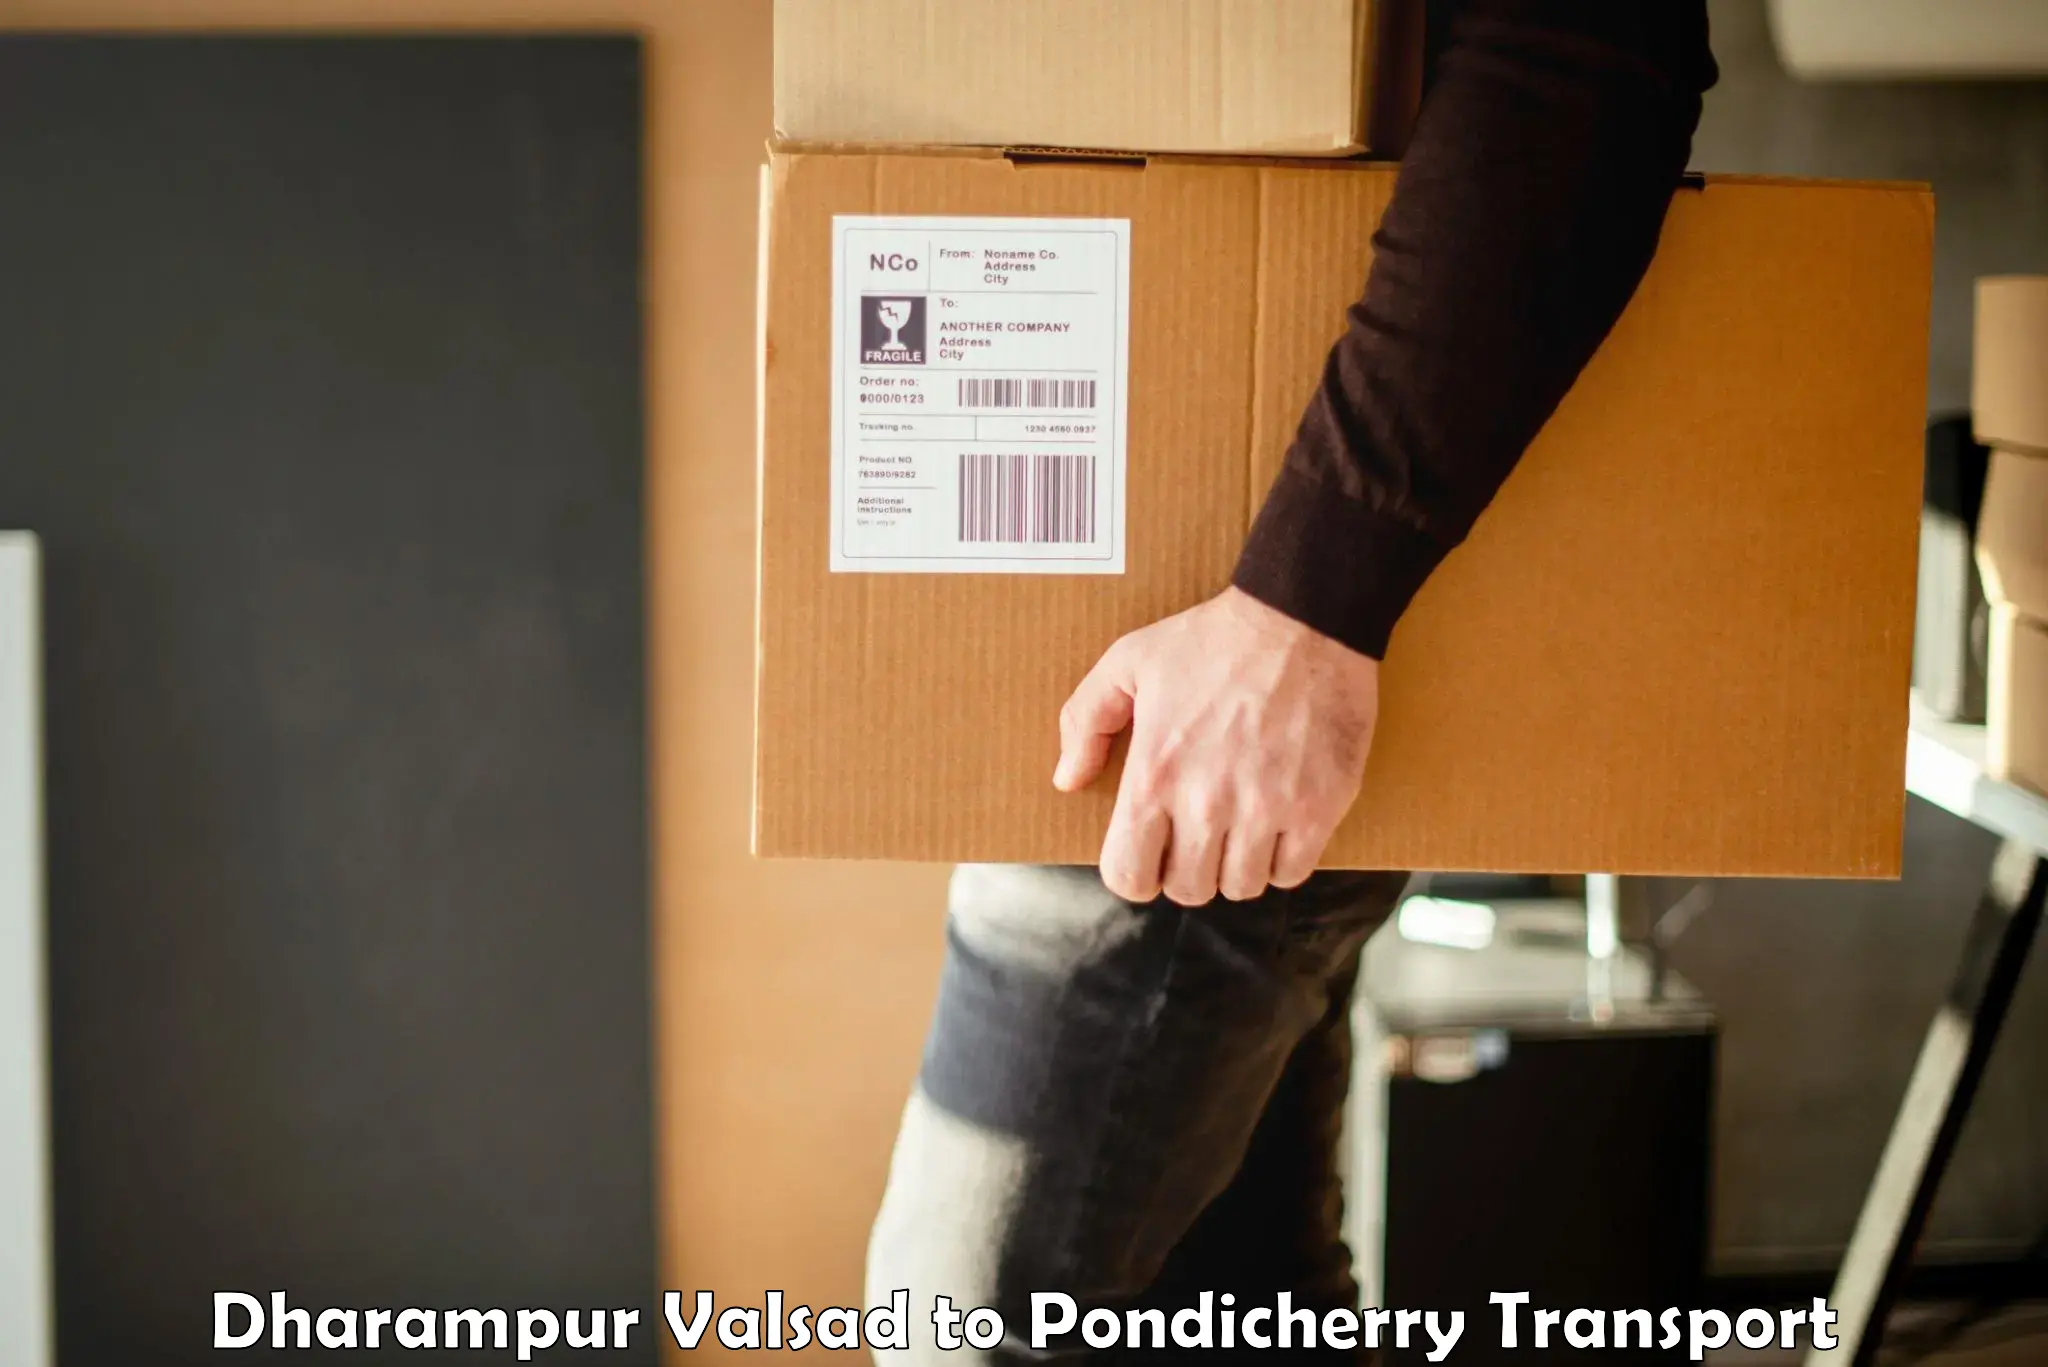 Commercial transport service Dharampur Valsad to Pondicherry